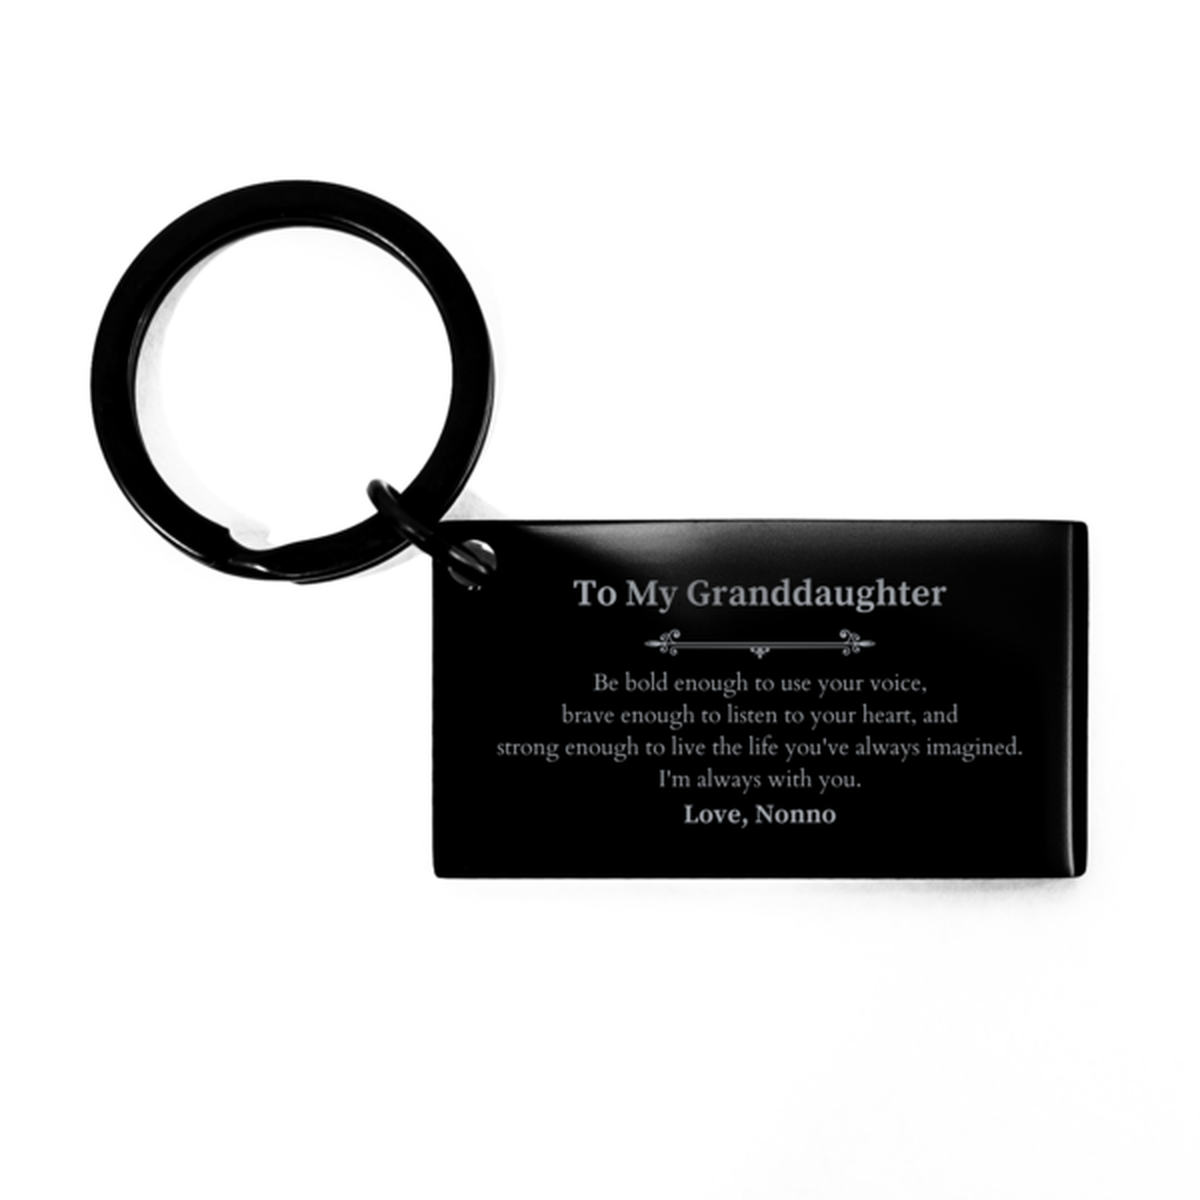 Keepsake Granddaughter Keychain Gift Idea Graduation Christmas Birthday Granddaughter from Nonno, Granddaughter Be bold enough to use your voice, brave enough to listen to your heart. Love, Nonno